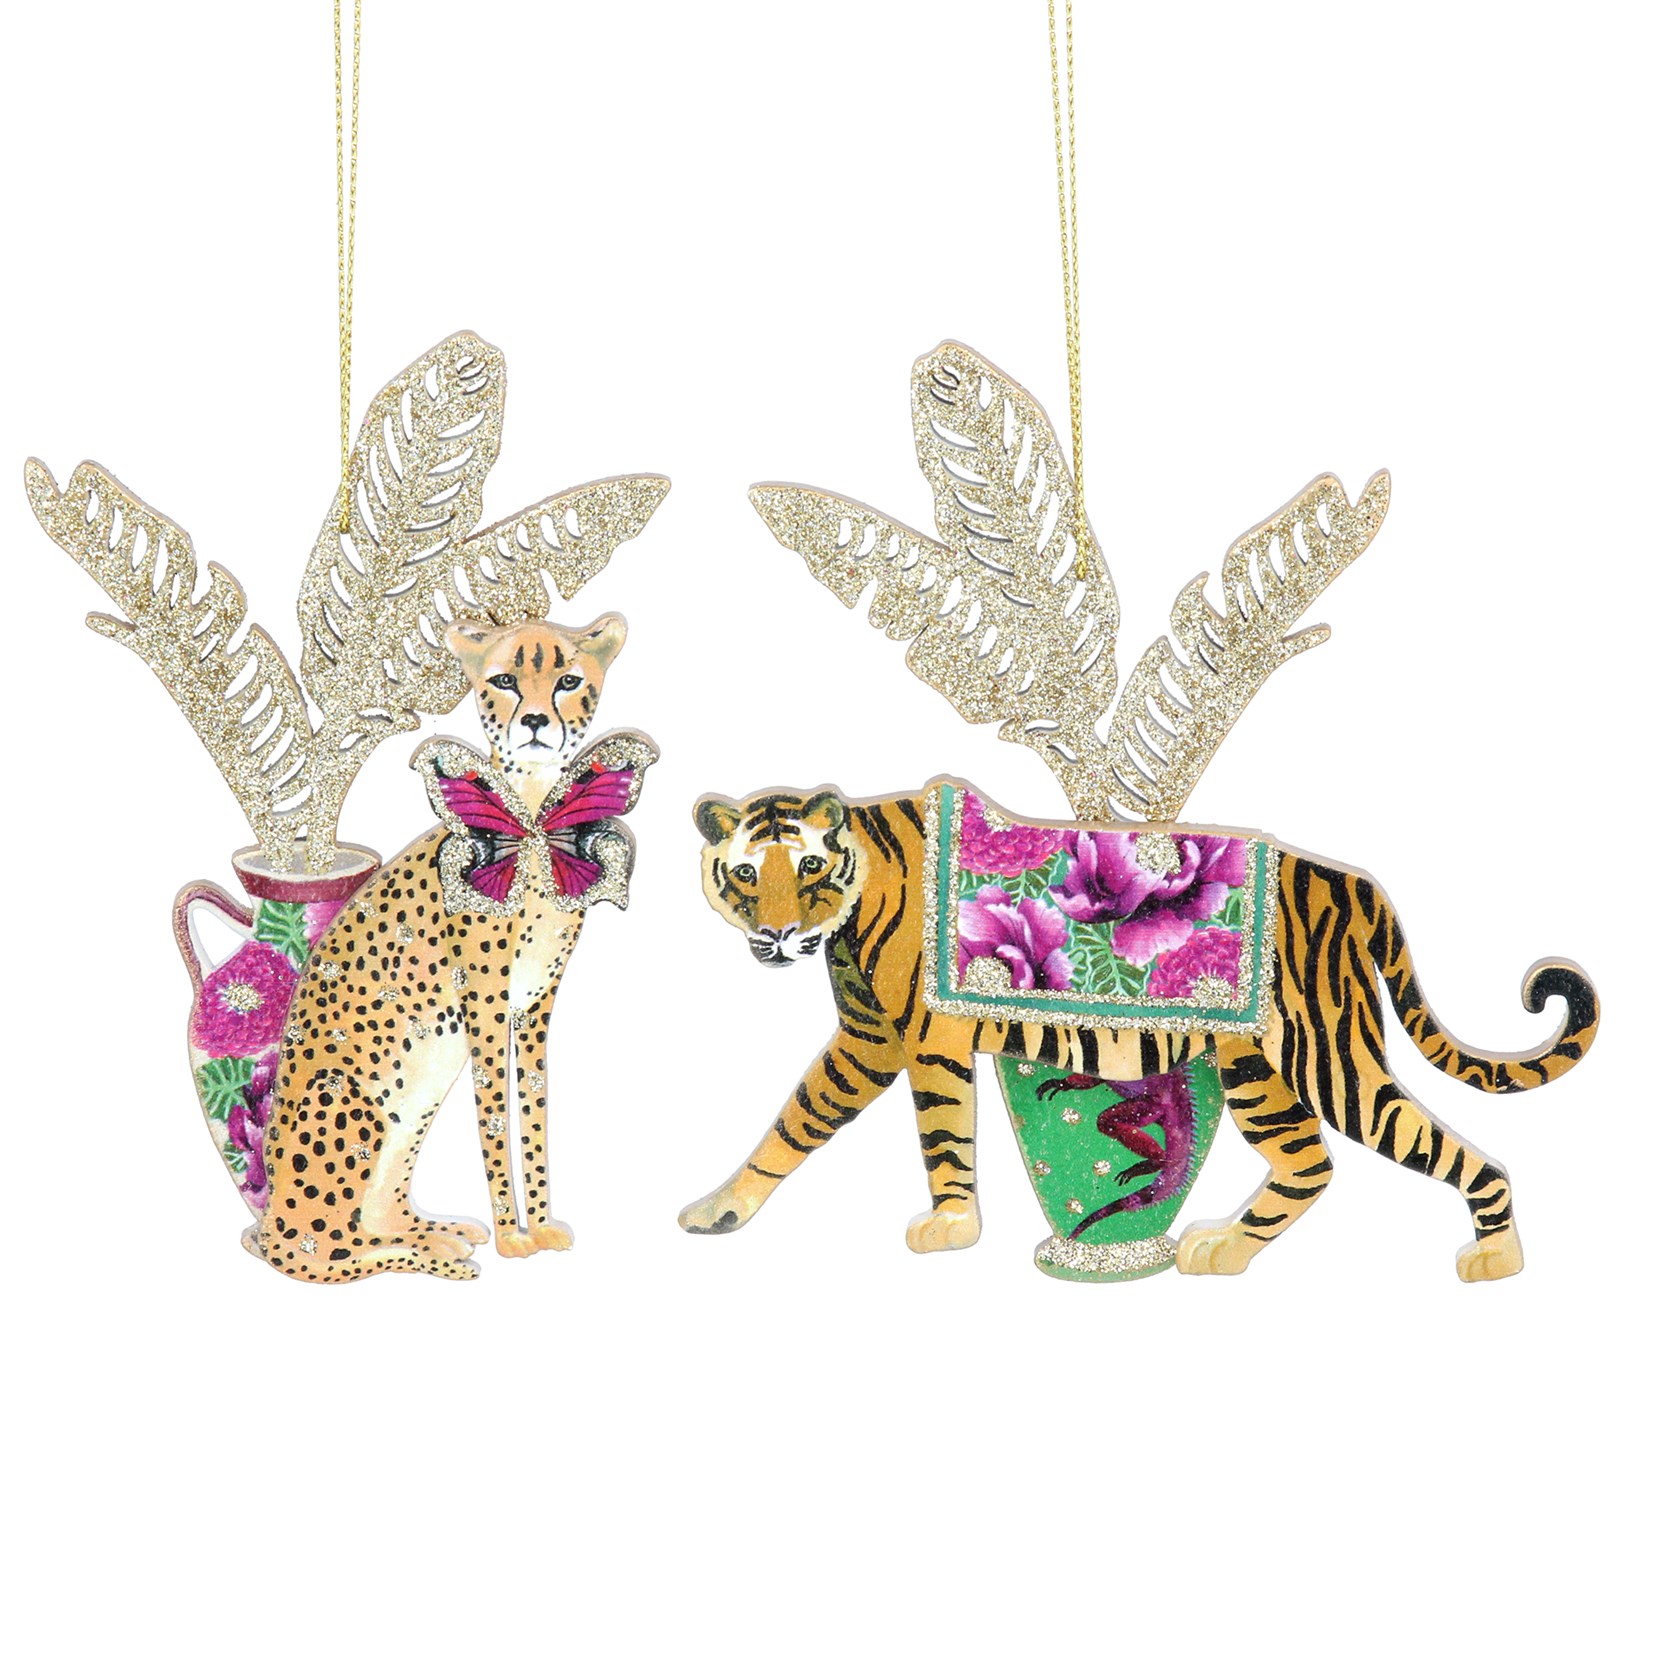 Tropic Fantasy Cheetah and Tiger hanging Christmas decoration. By Gisela Graham. The perfect festive addition to your home.